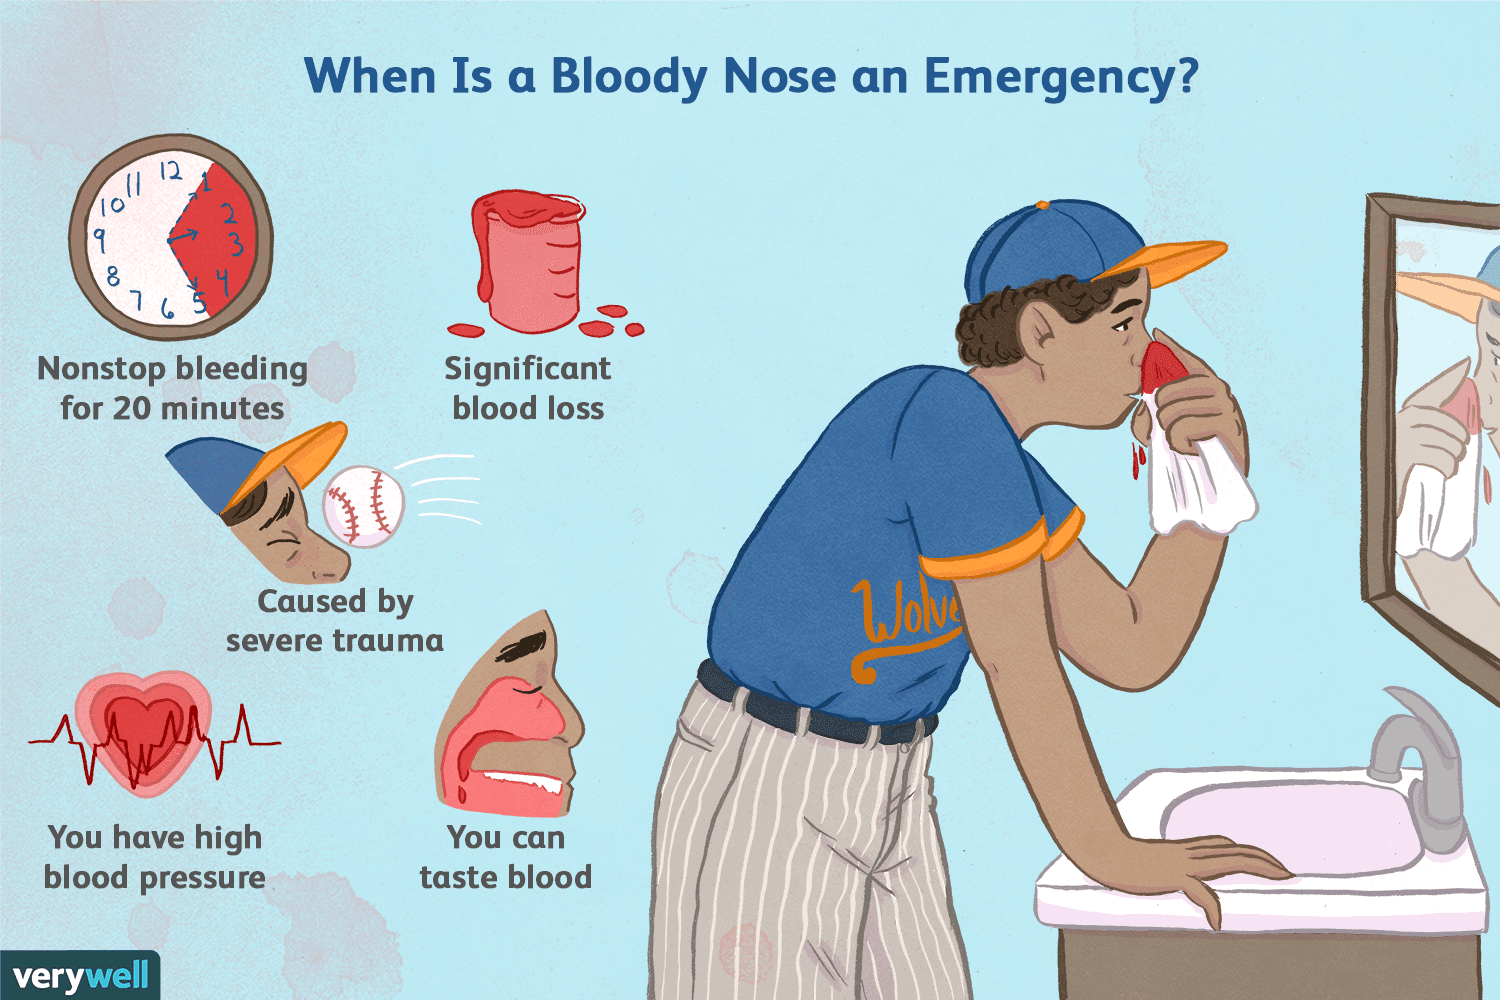 When a Bloody Nose Becomes an Emergency?